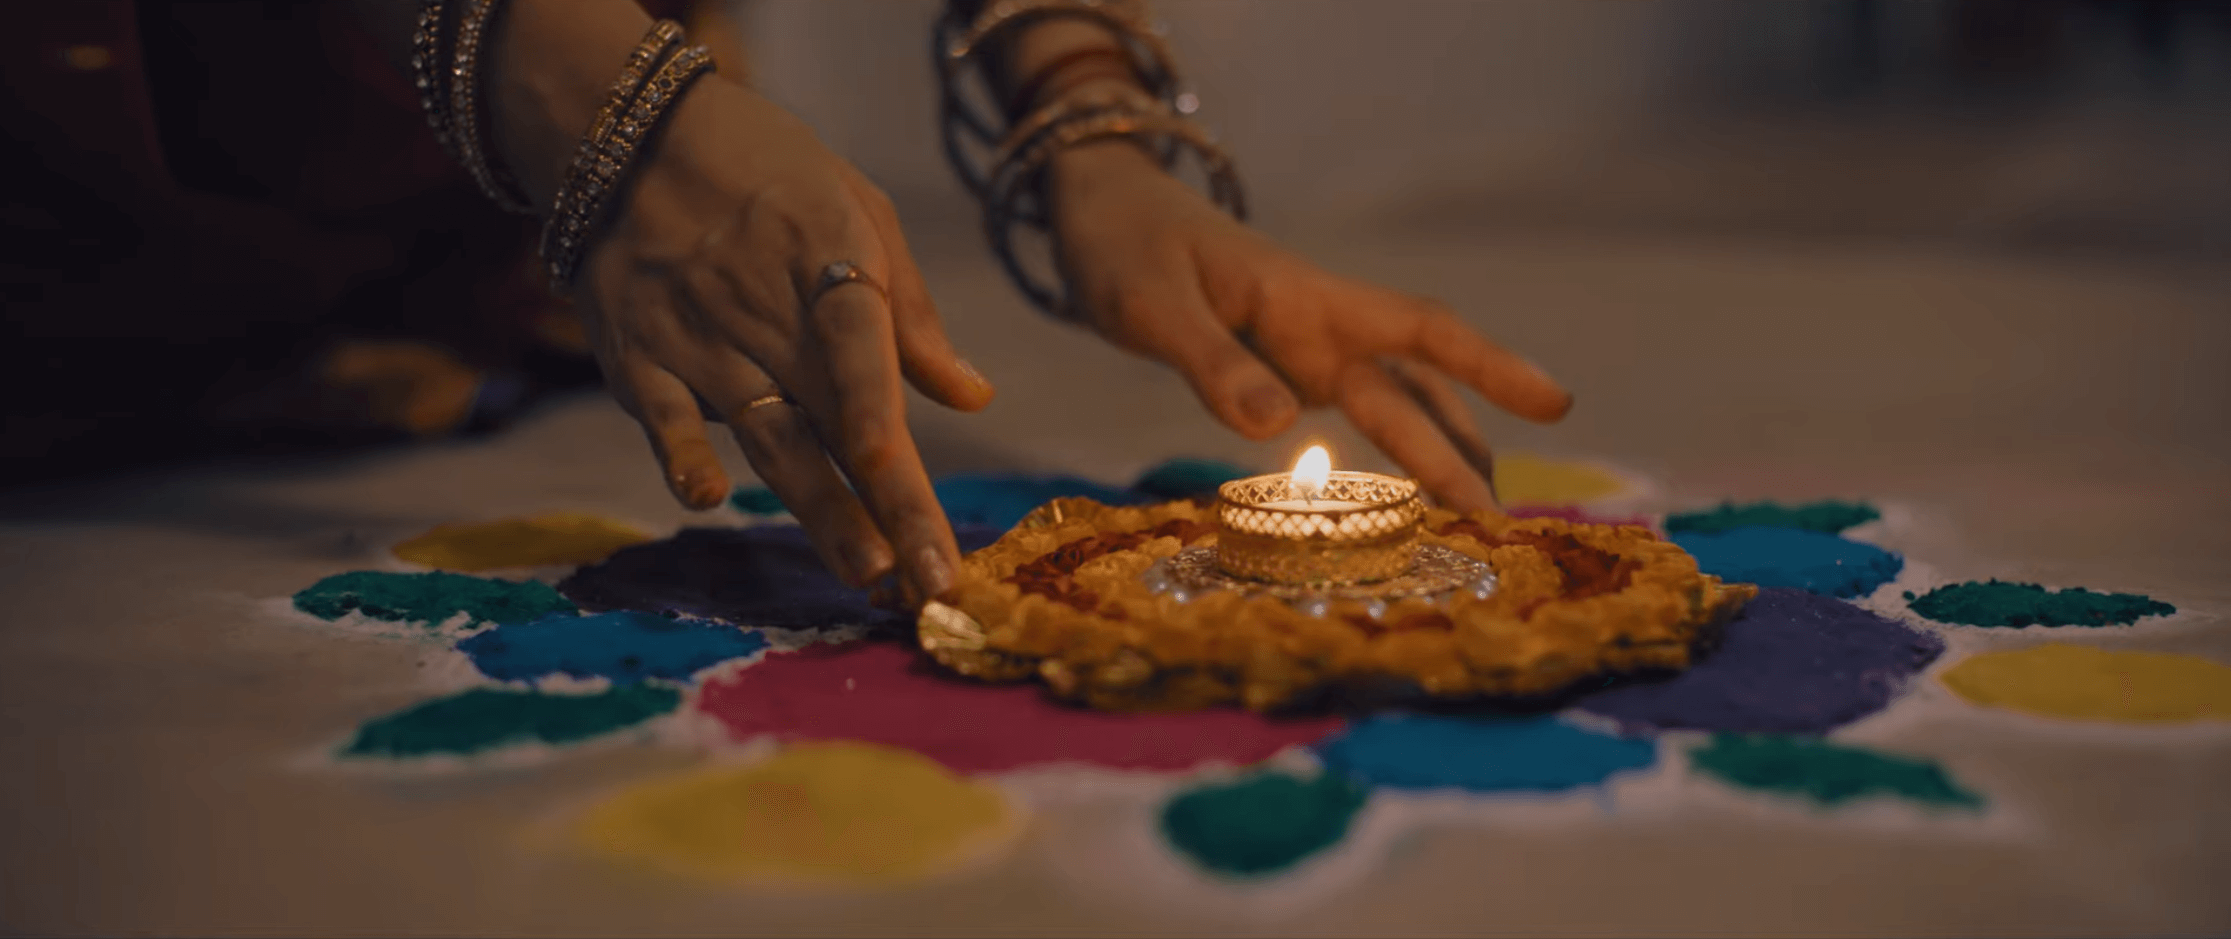 SingTel's Latest Deepavali Ad Reminds Us That There is Light at the End of the Tunnel